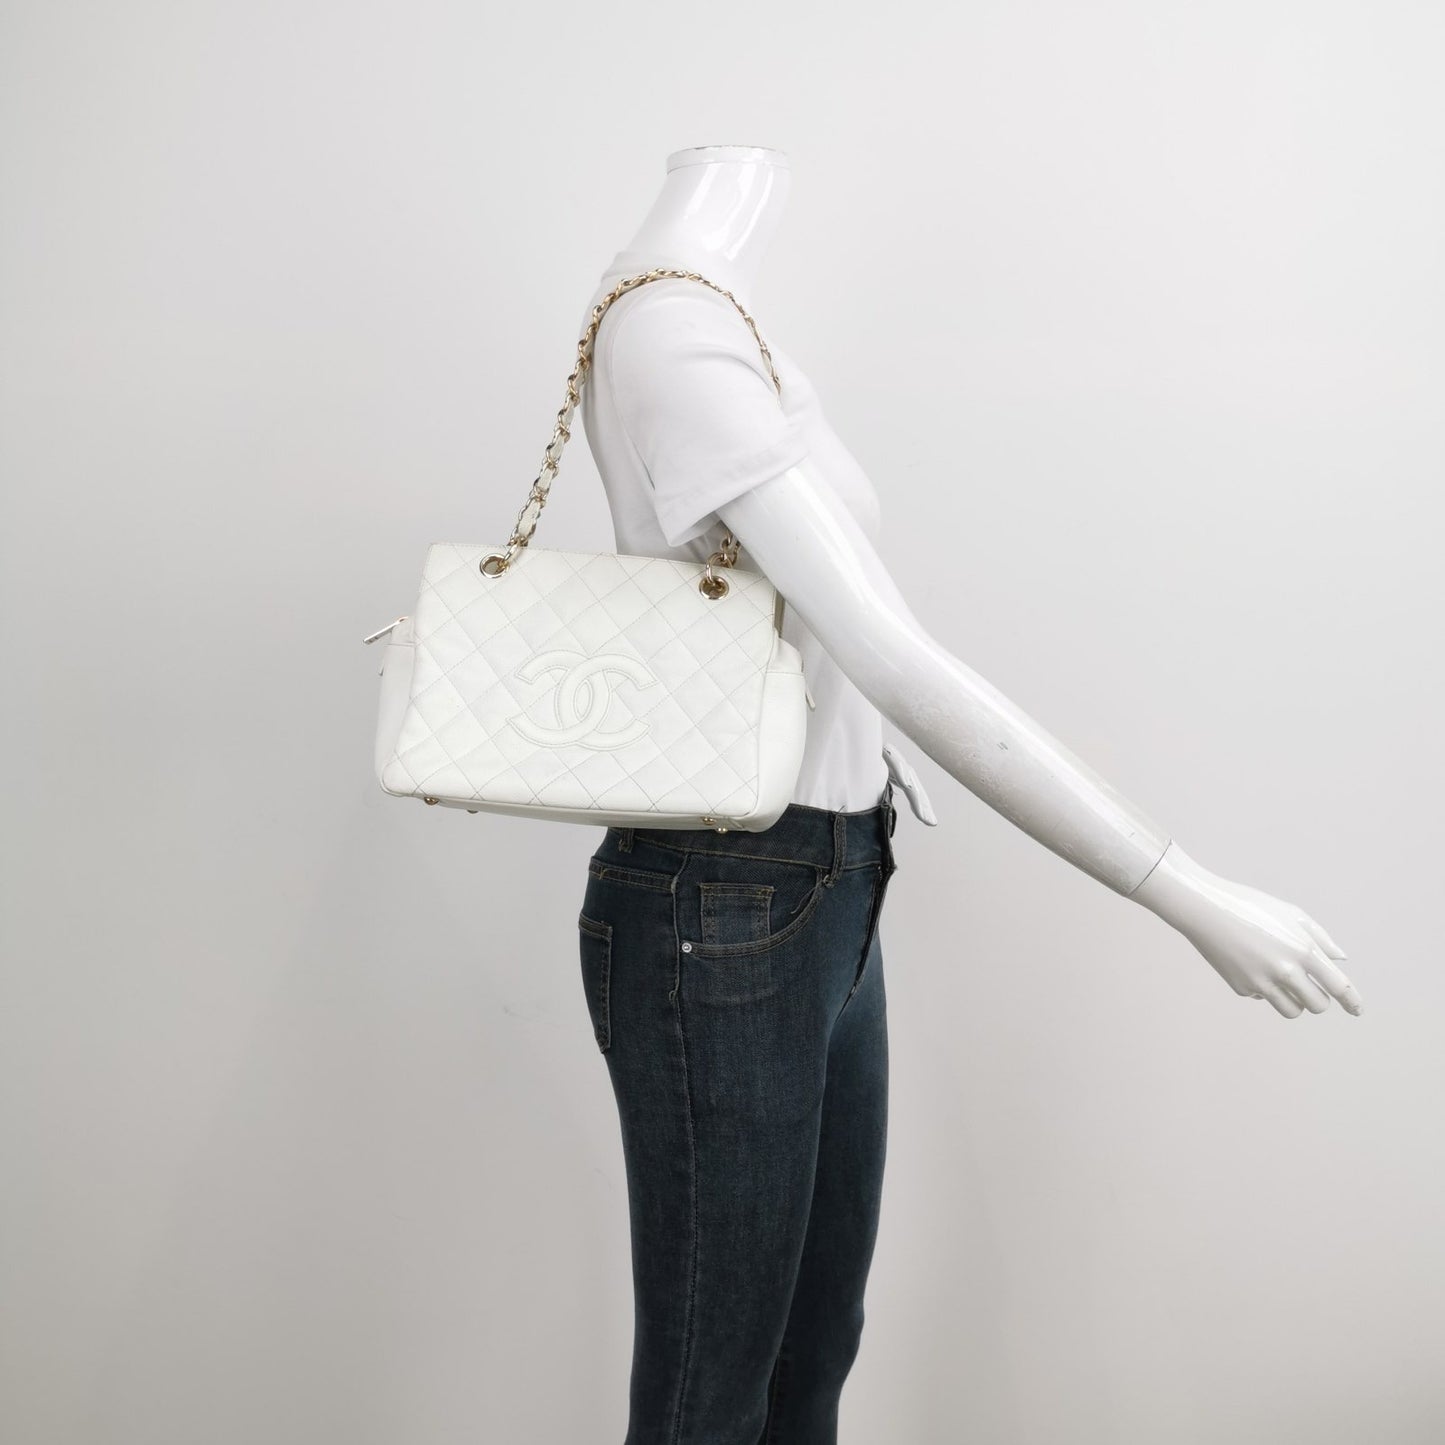 Chanel PST Petite Shopping Tote 2002 White Caviar Leather Chain Bag